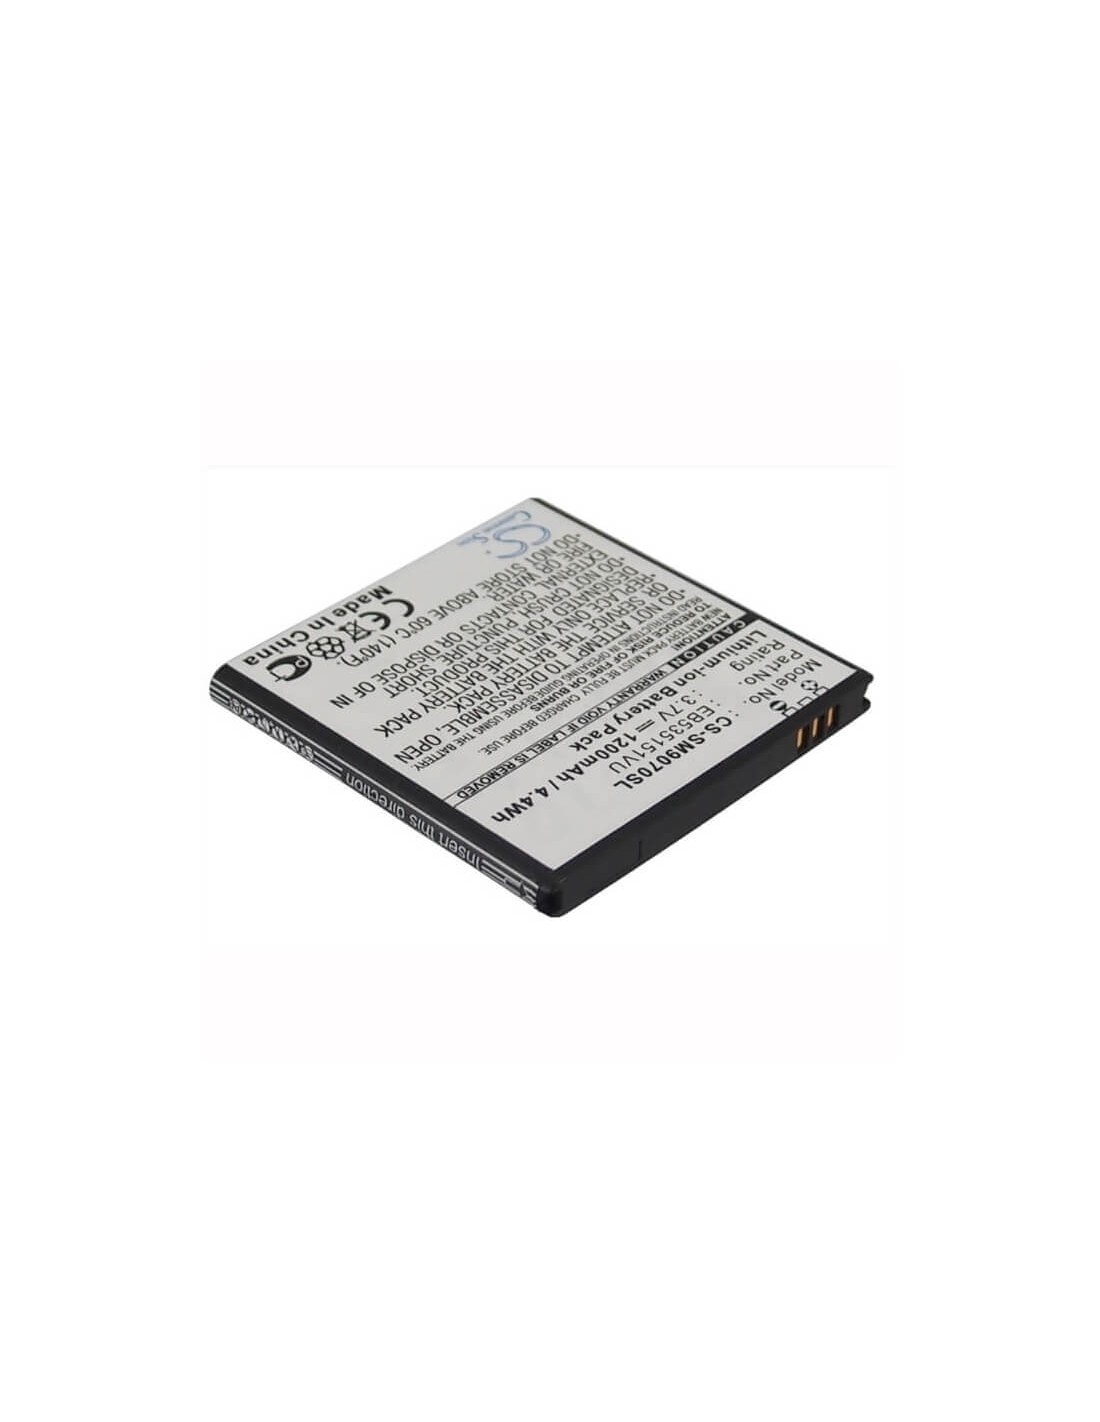 Battery for Samsung GT-i9070, GT-i9070P, Galaxy S Advance 3.7V, 1200mAh - 4.44Wh